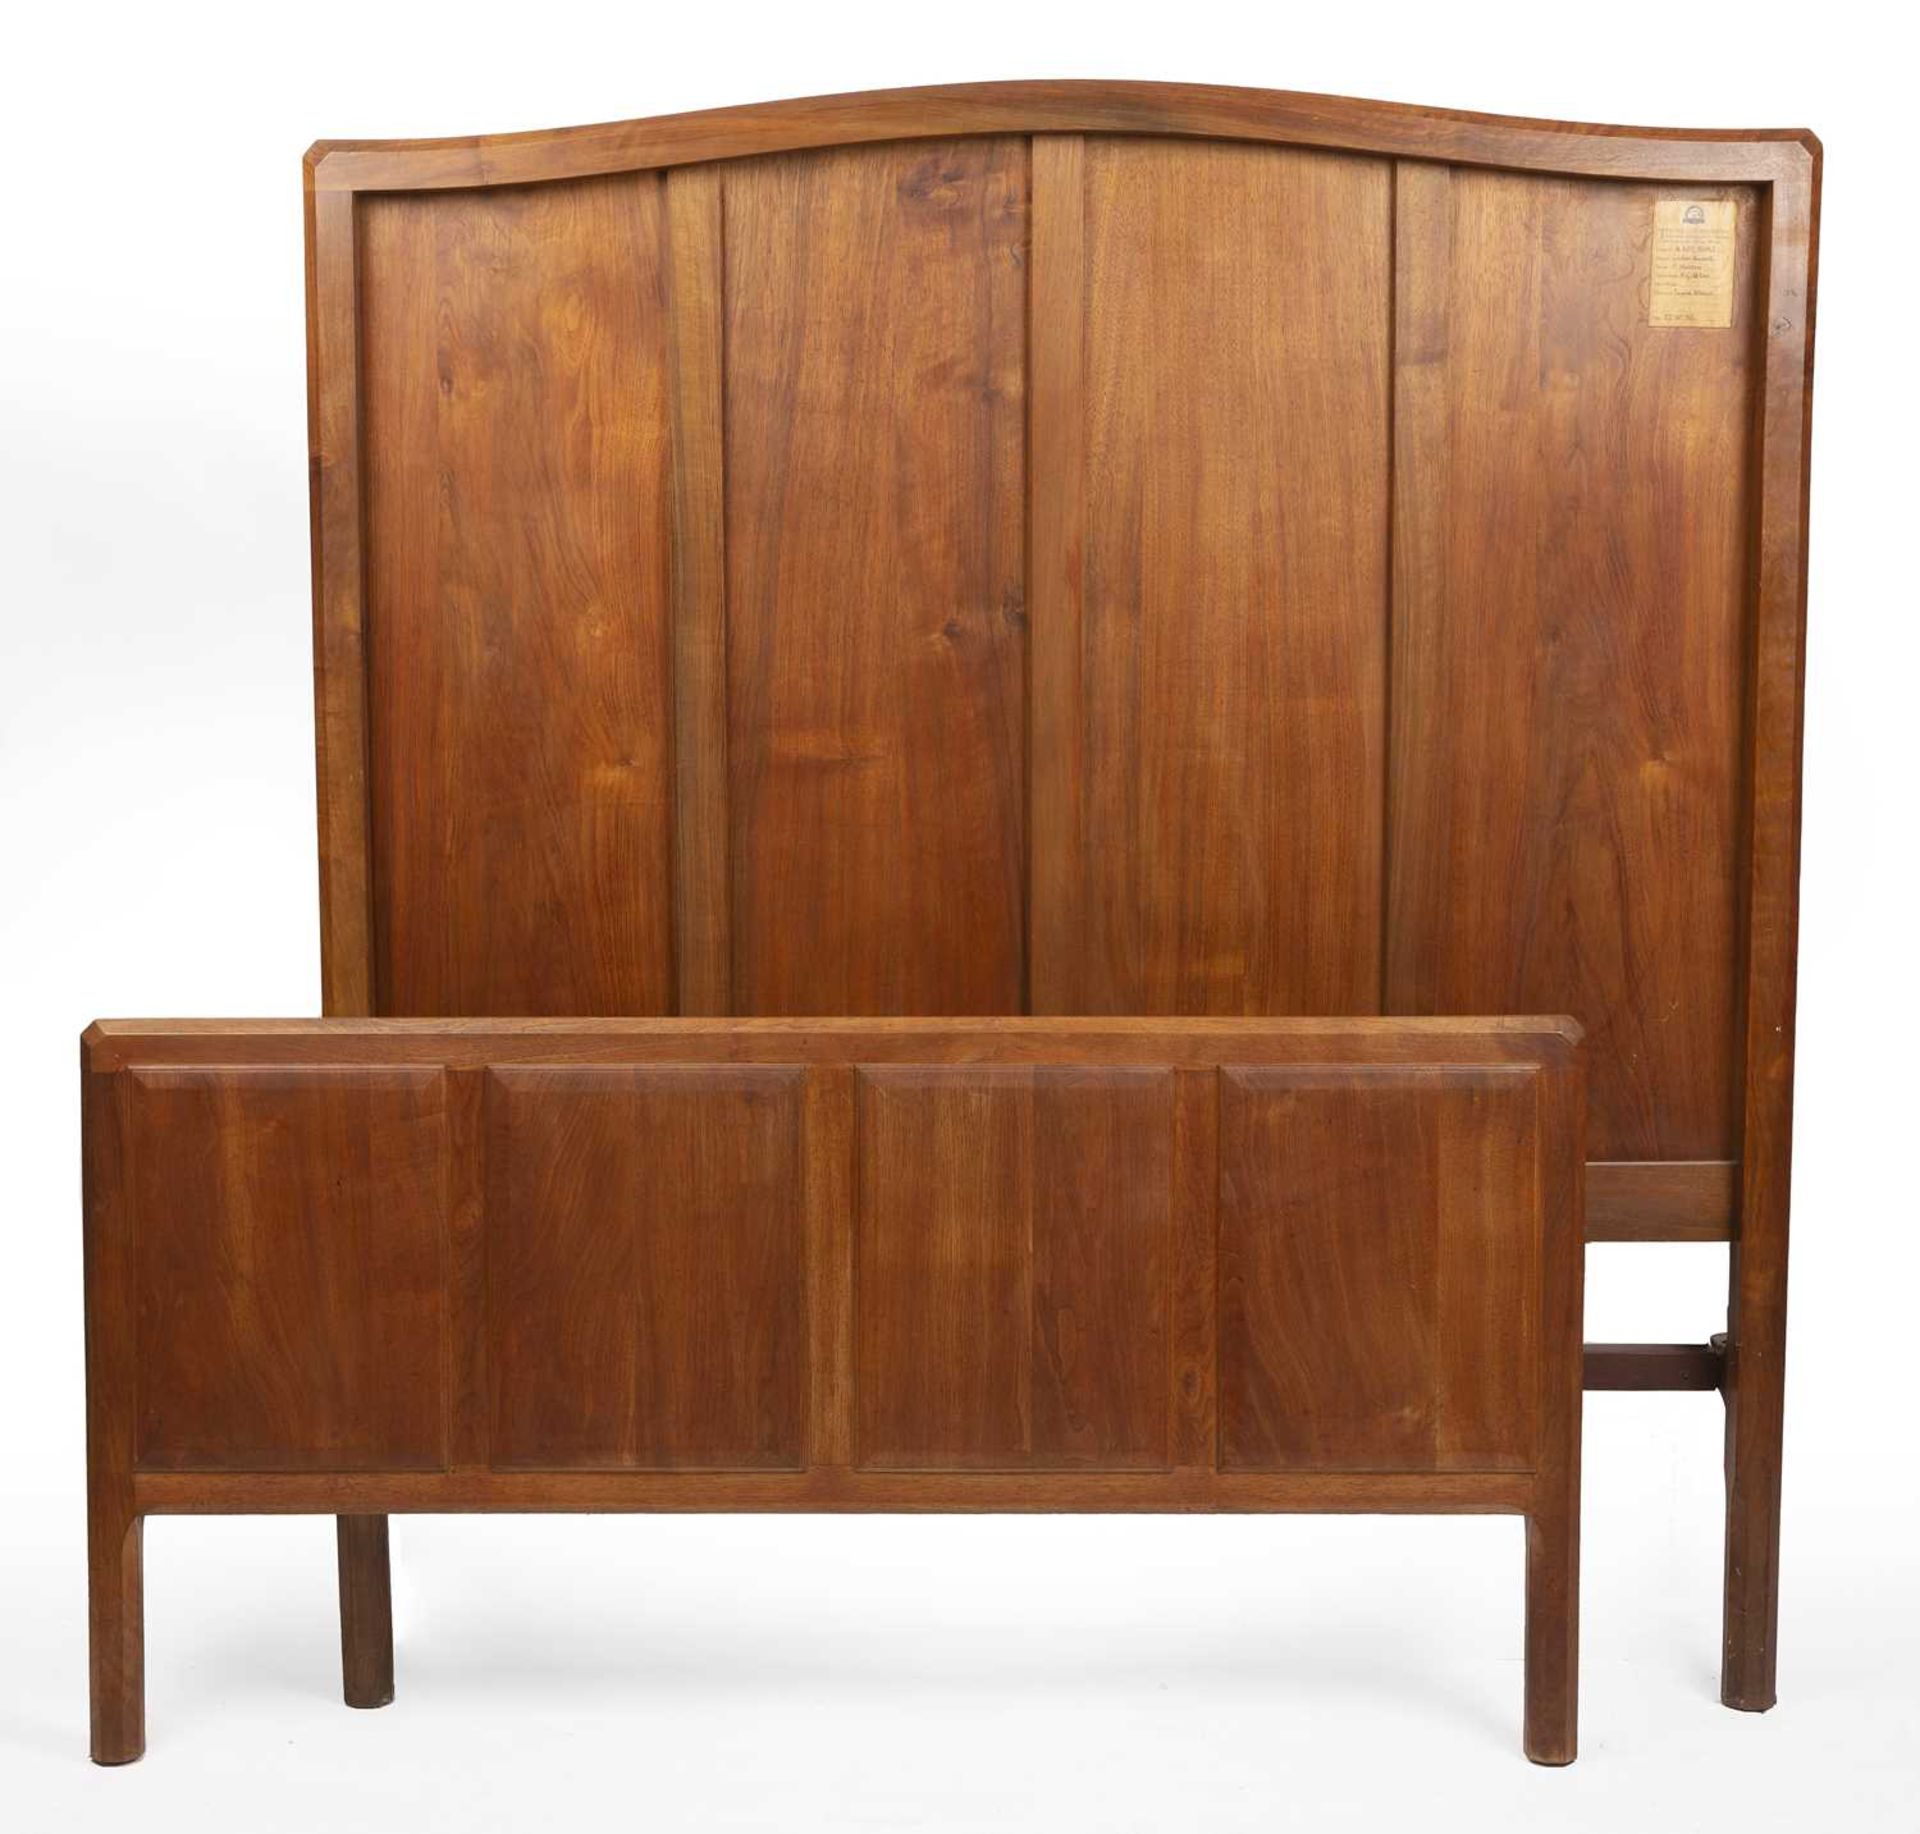 Gordon Russell (1892-1980) Double bed frame English walnut with metal side rails with original paper